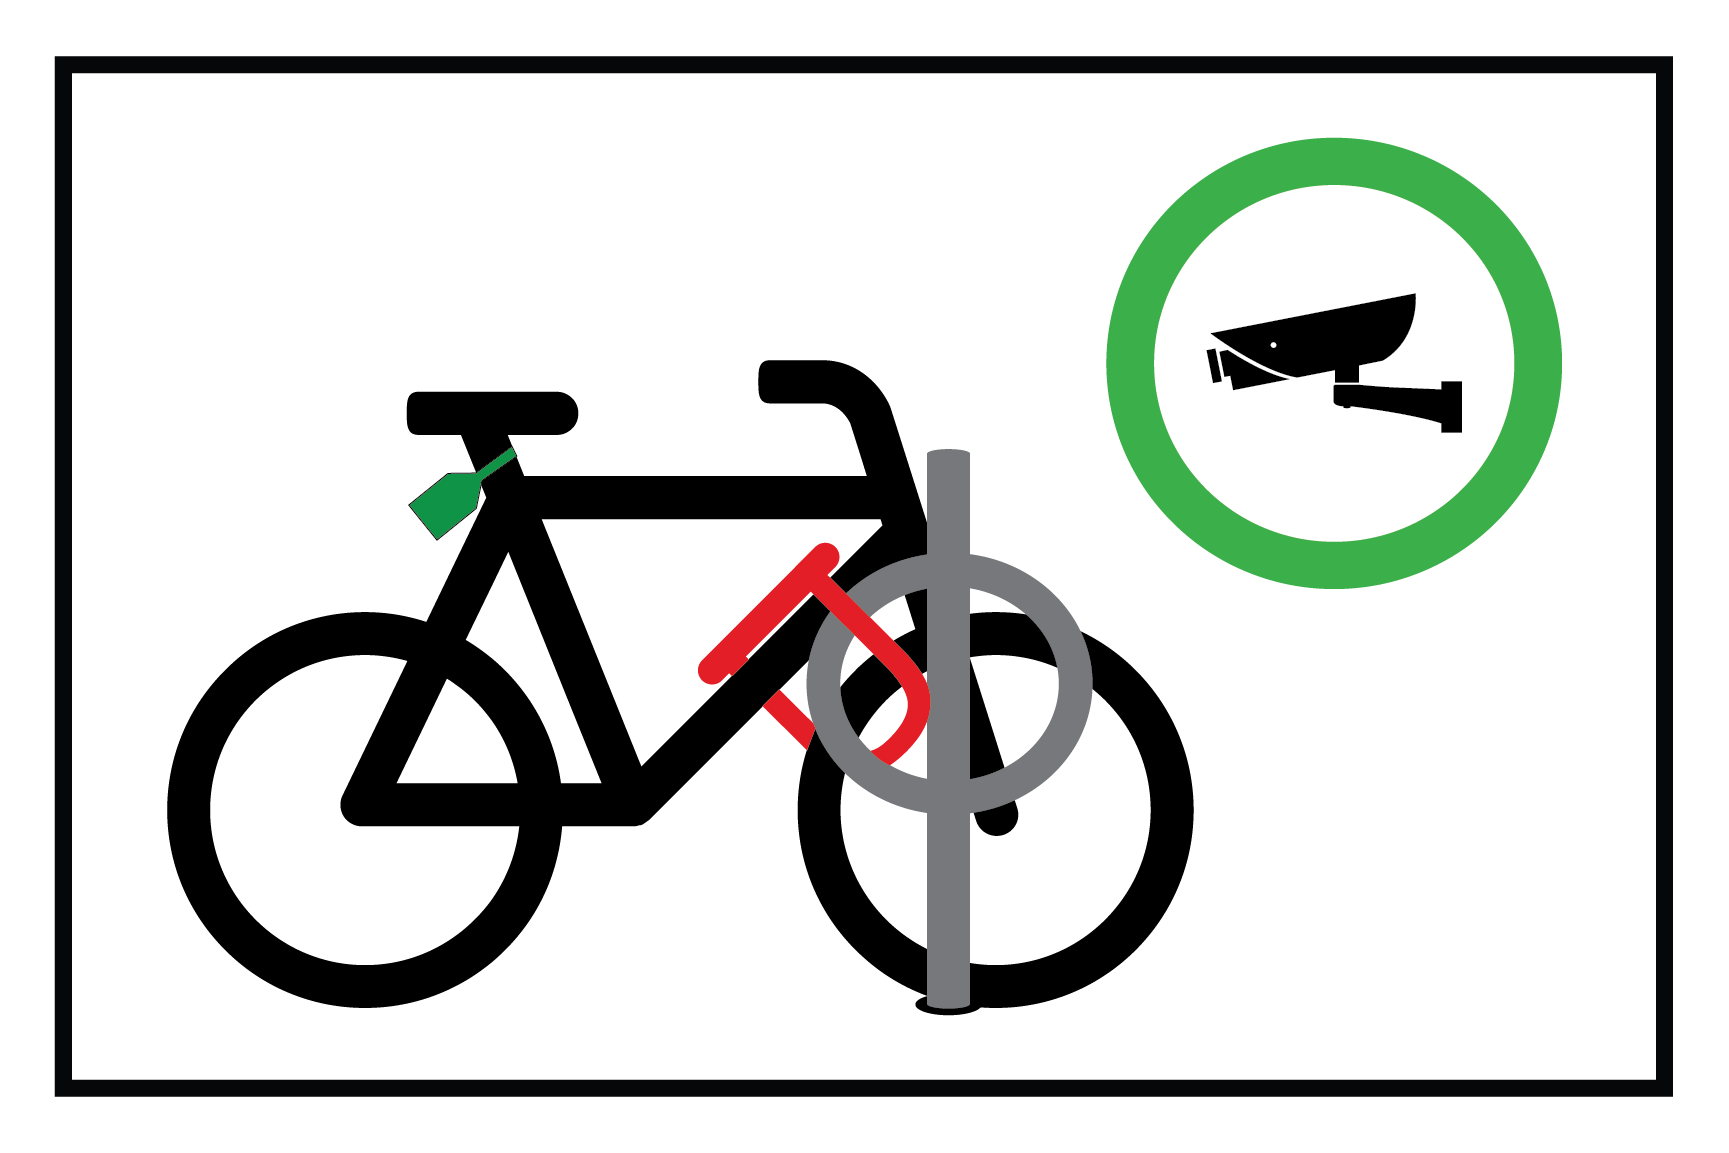 A diagram showing how to securely lock a bike inside a Bikesecure shelter.